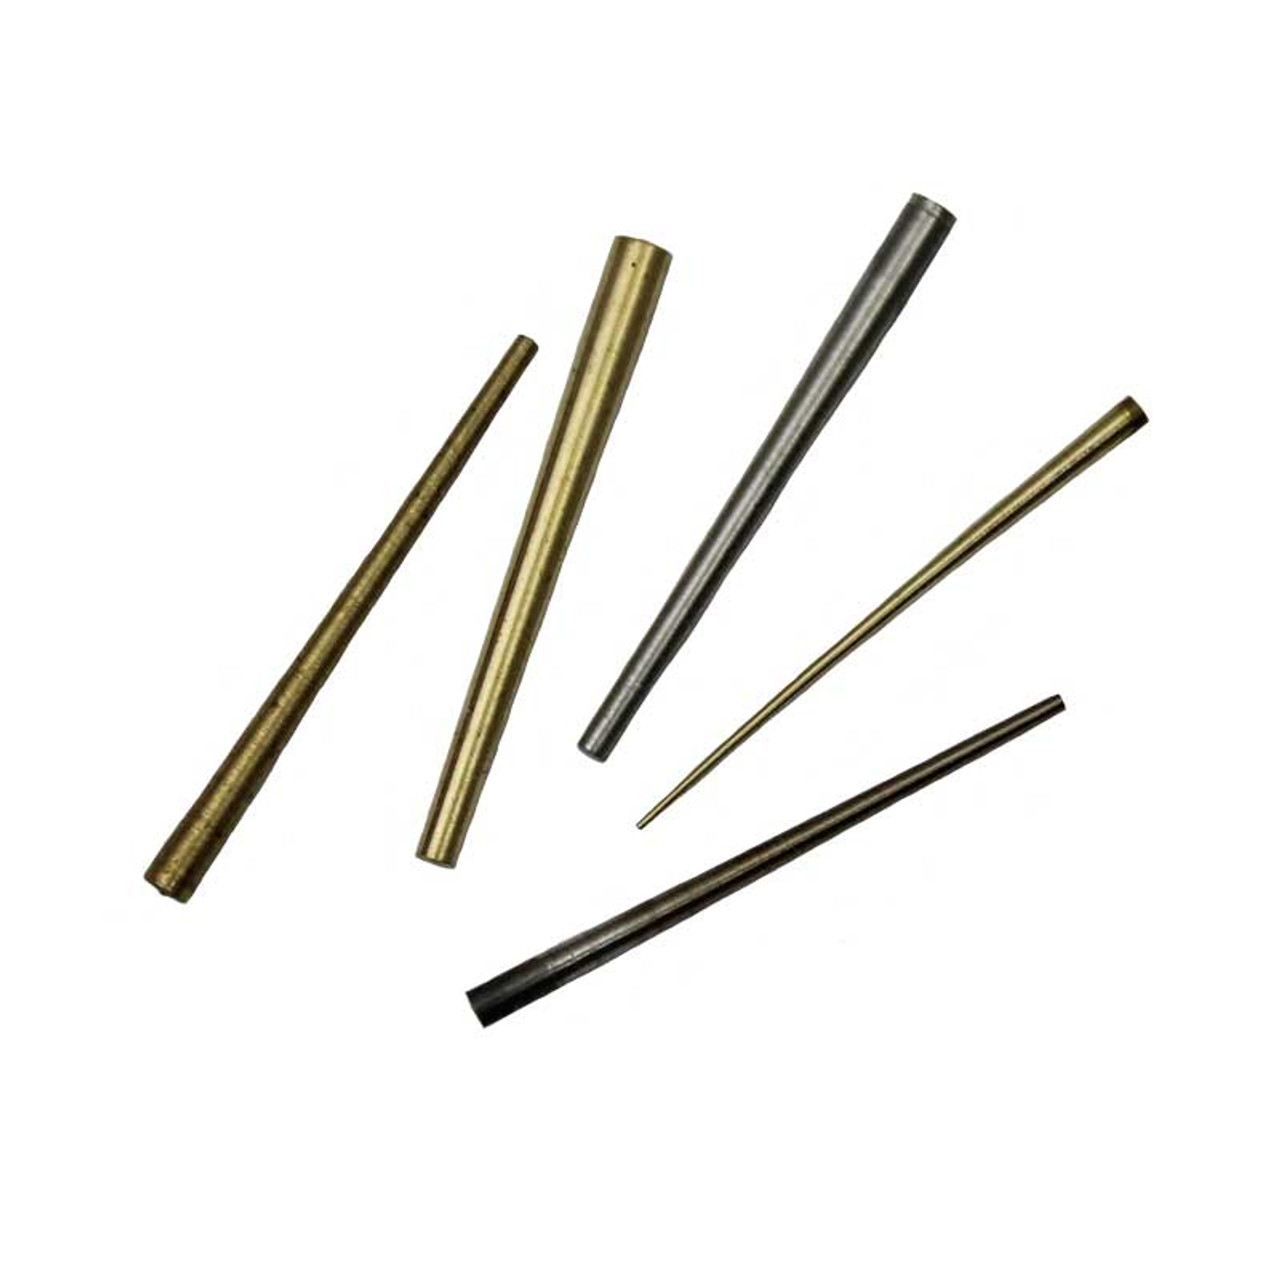 100 Assorted Brass and Steel Pins for Watch and Jewelry Repair